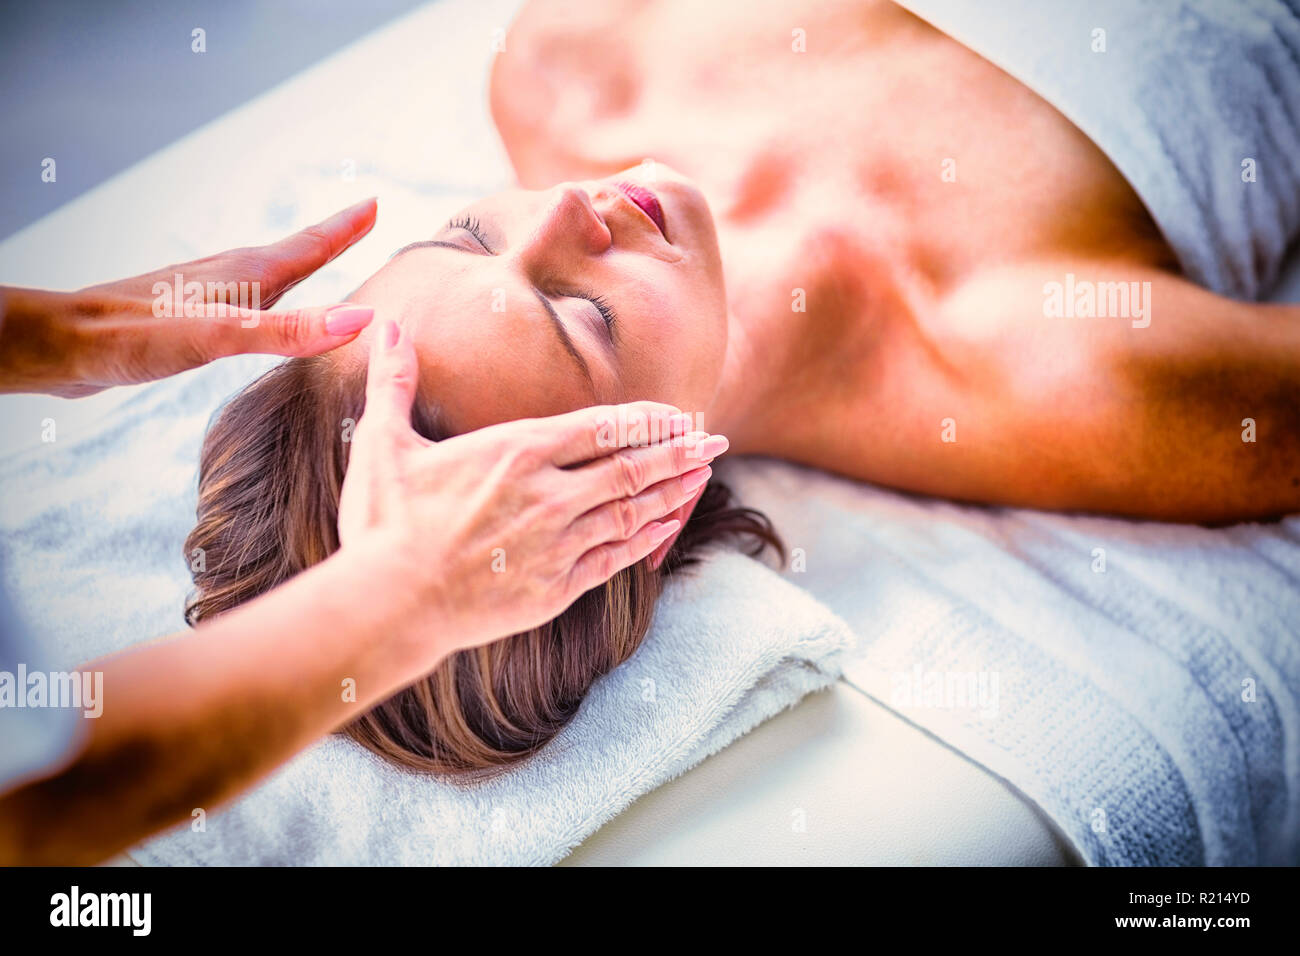 Cropped hands of therapist performing reiki on woman Stock Photo